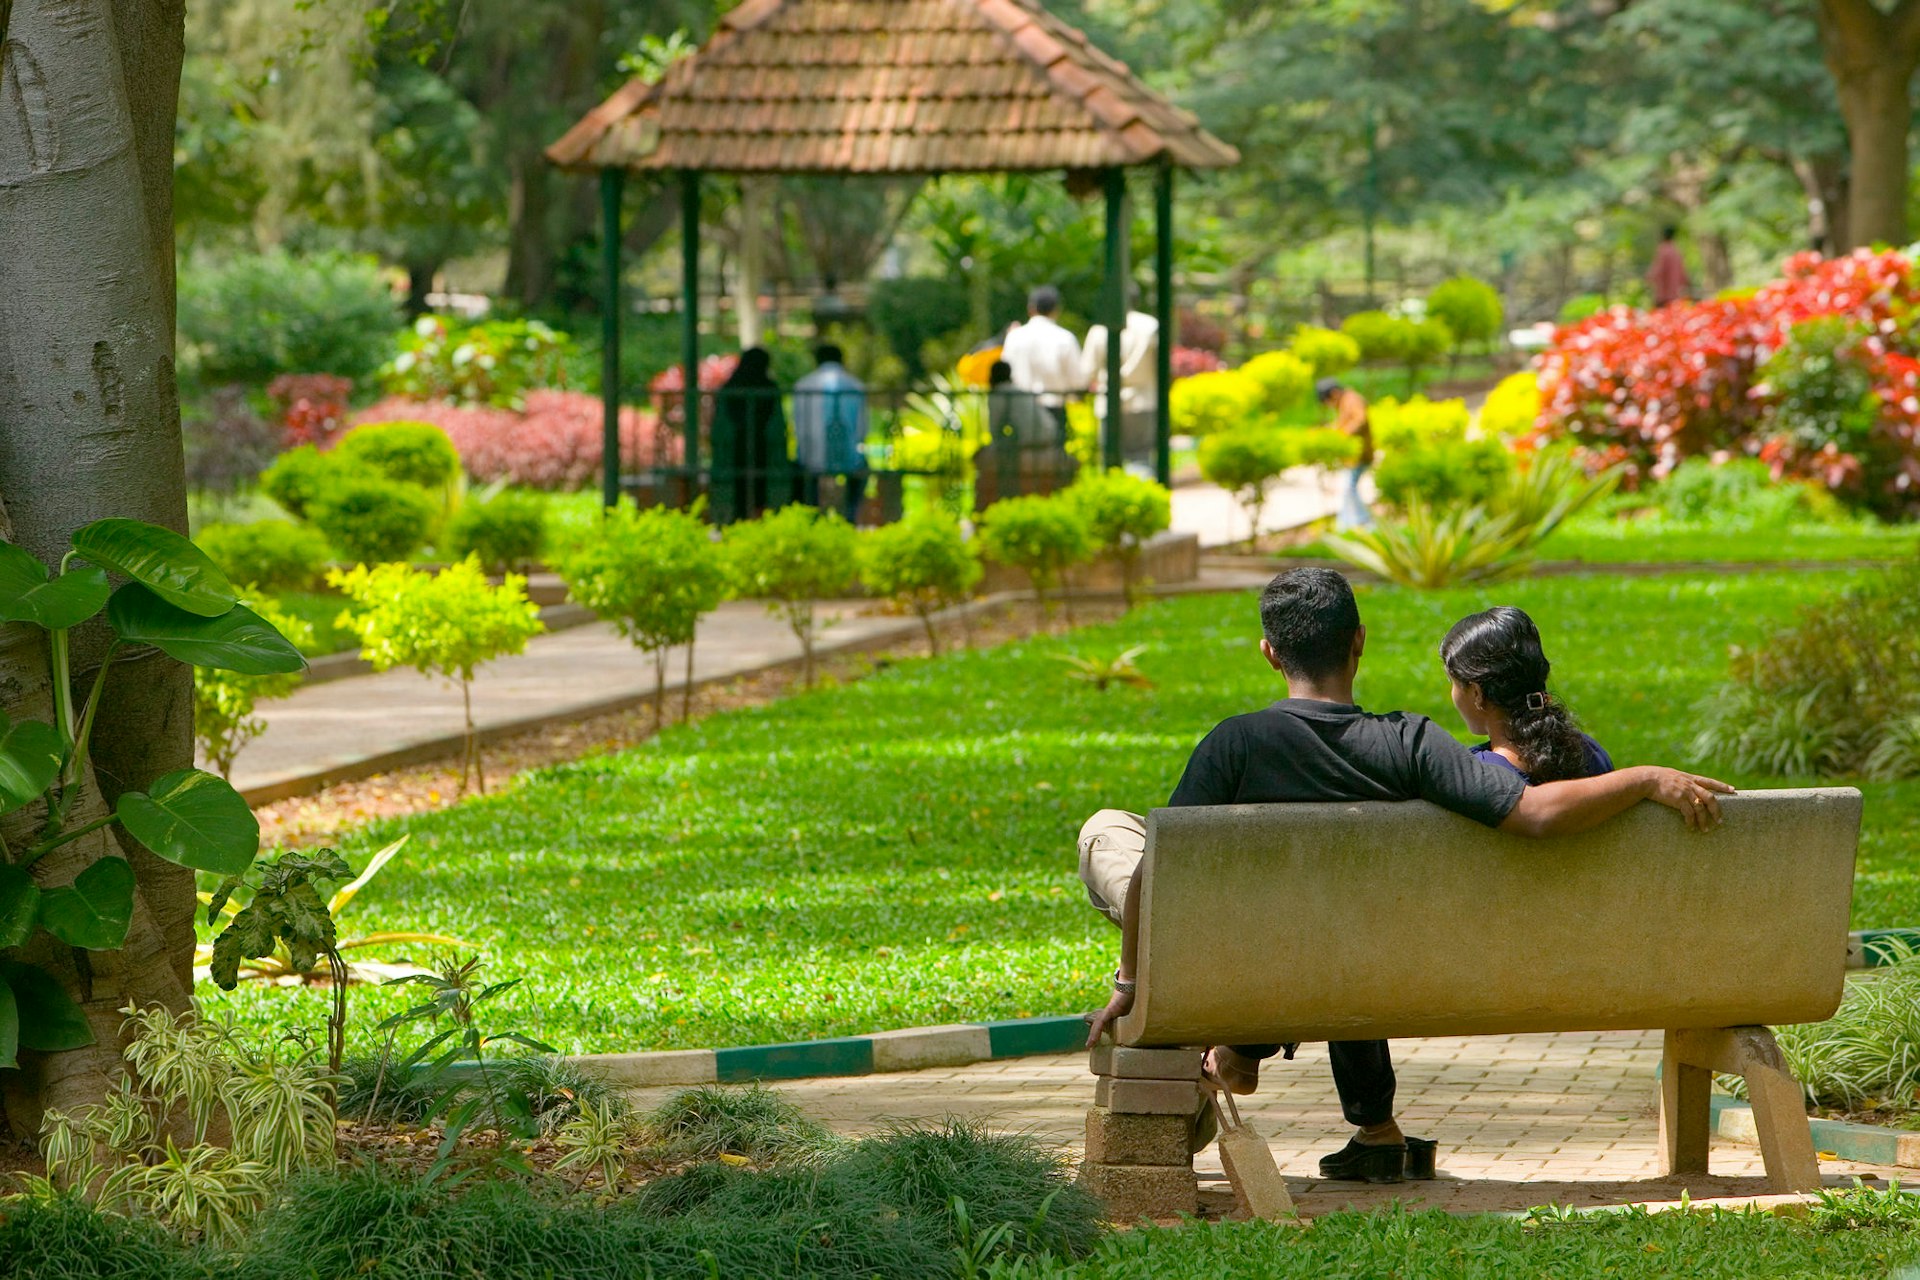 Peaceful scenes in Cubbon Park, the 'lungs of Bengaluru' © Will & Deni McIntyre / Getty Images